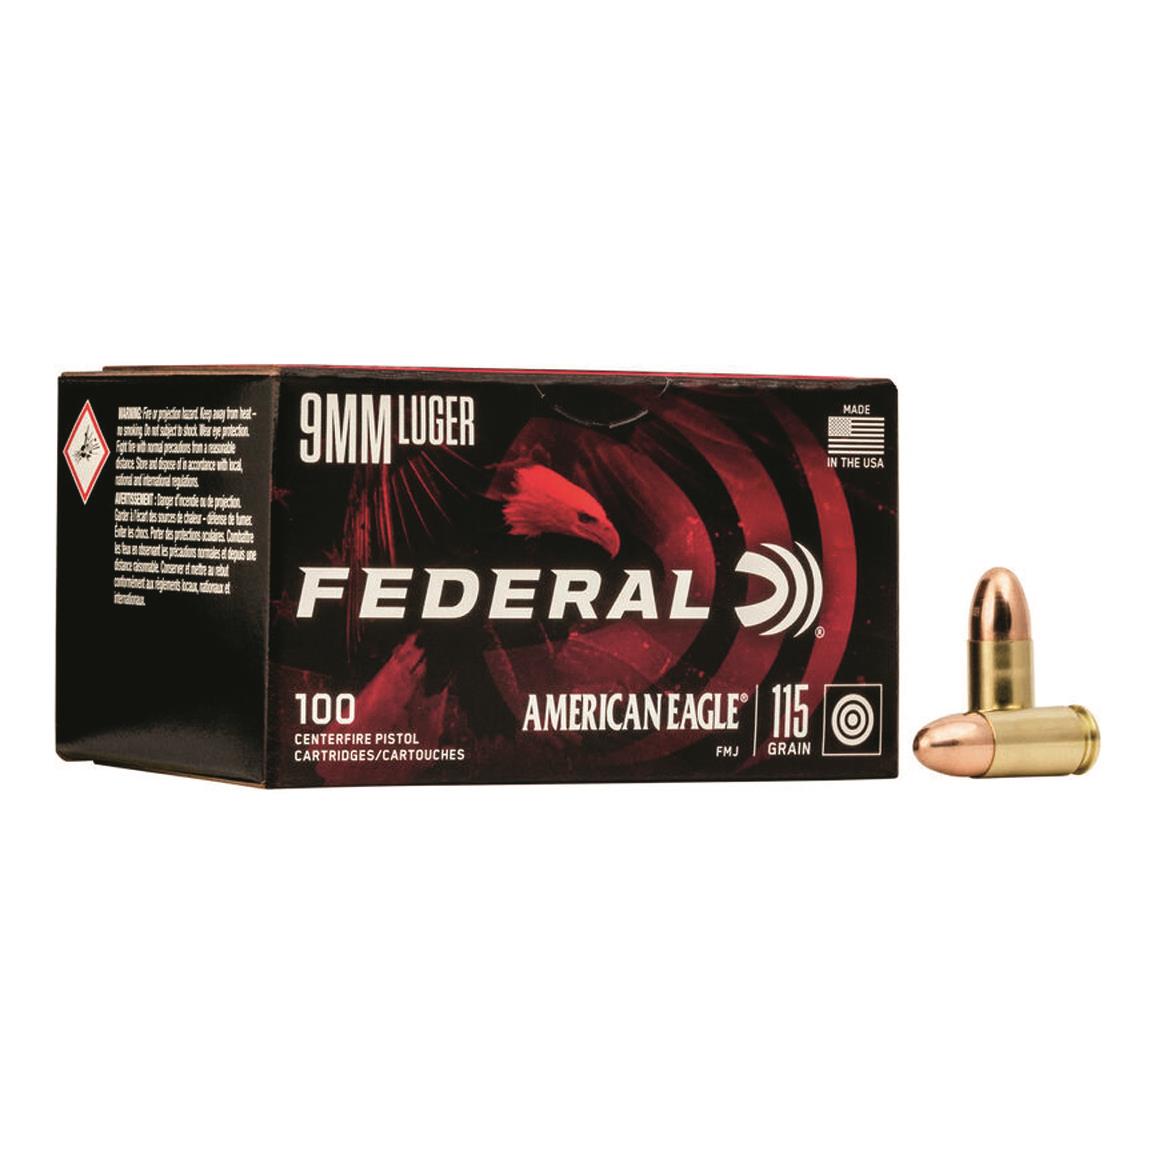 Federal American Eagle, 9mm, FMJ, 115 Grain, 100 Rounds